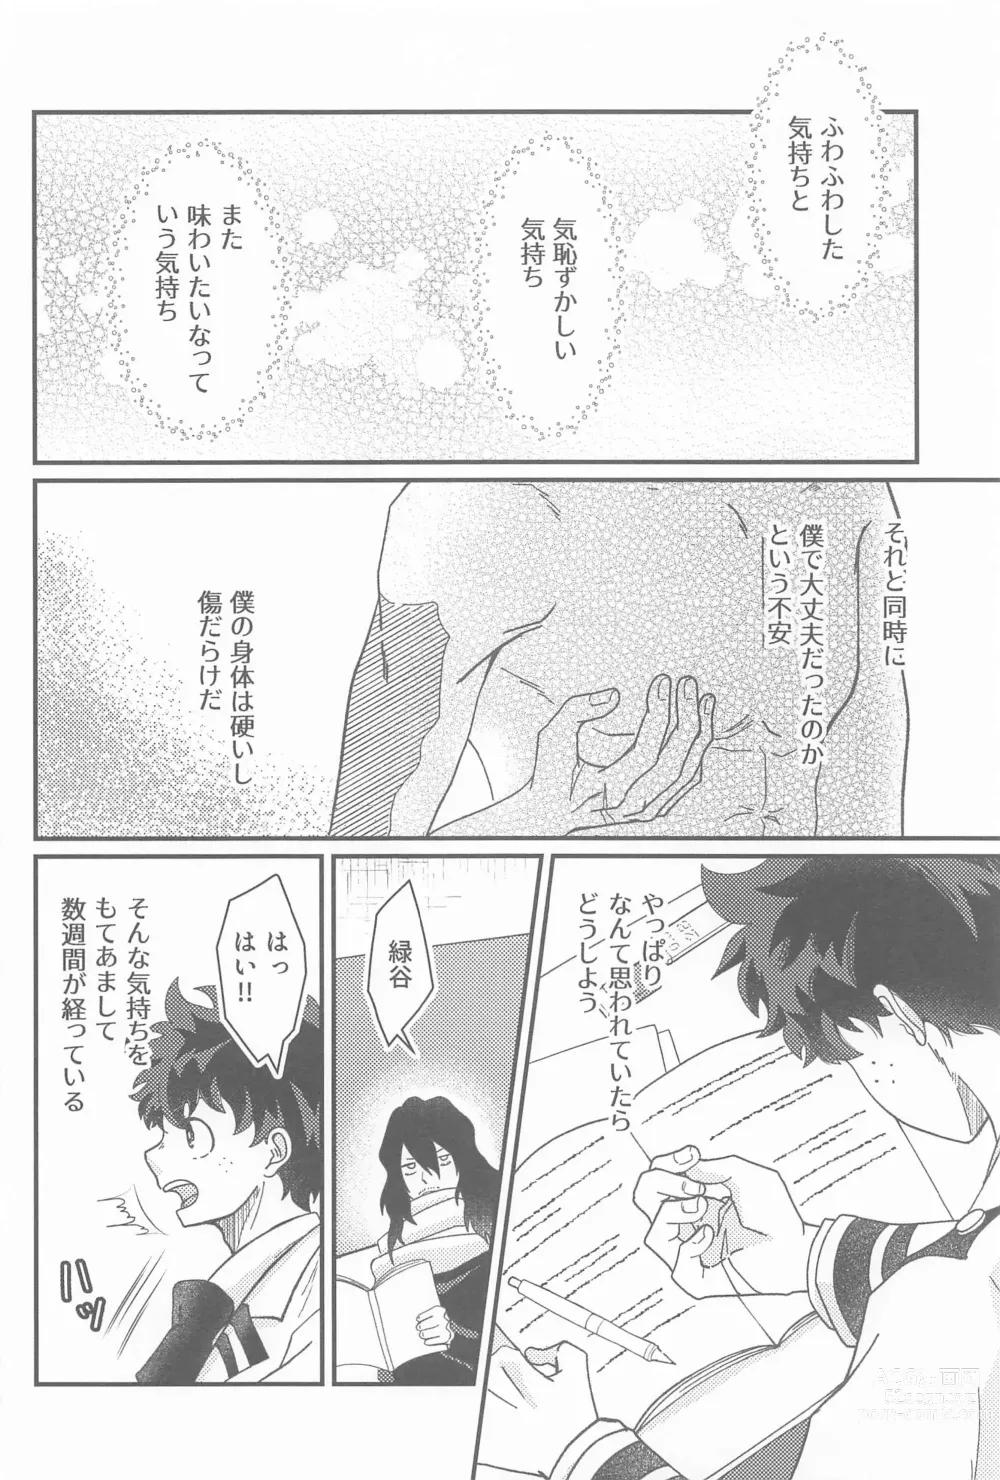 Page 7 of doujinshi Second Sweet